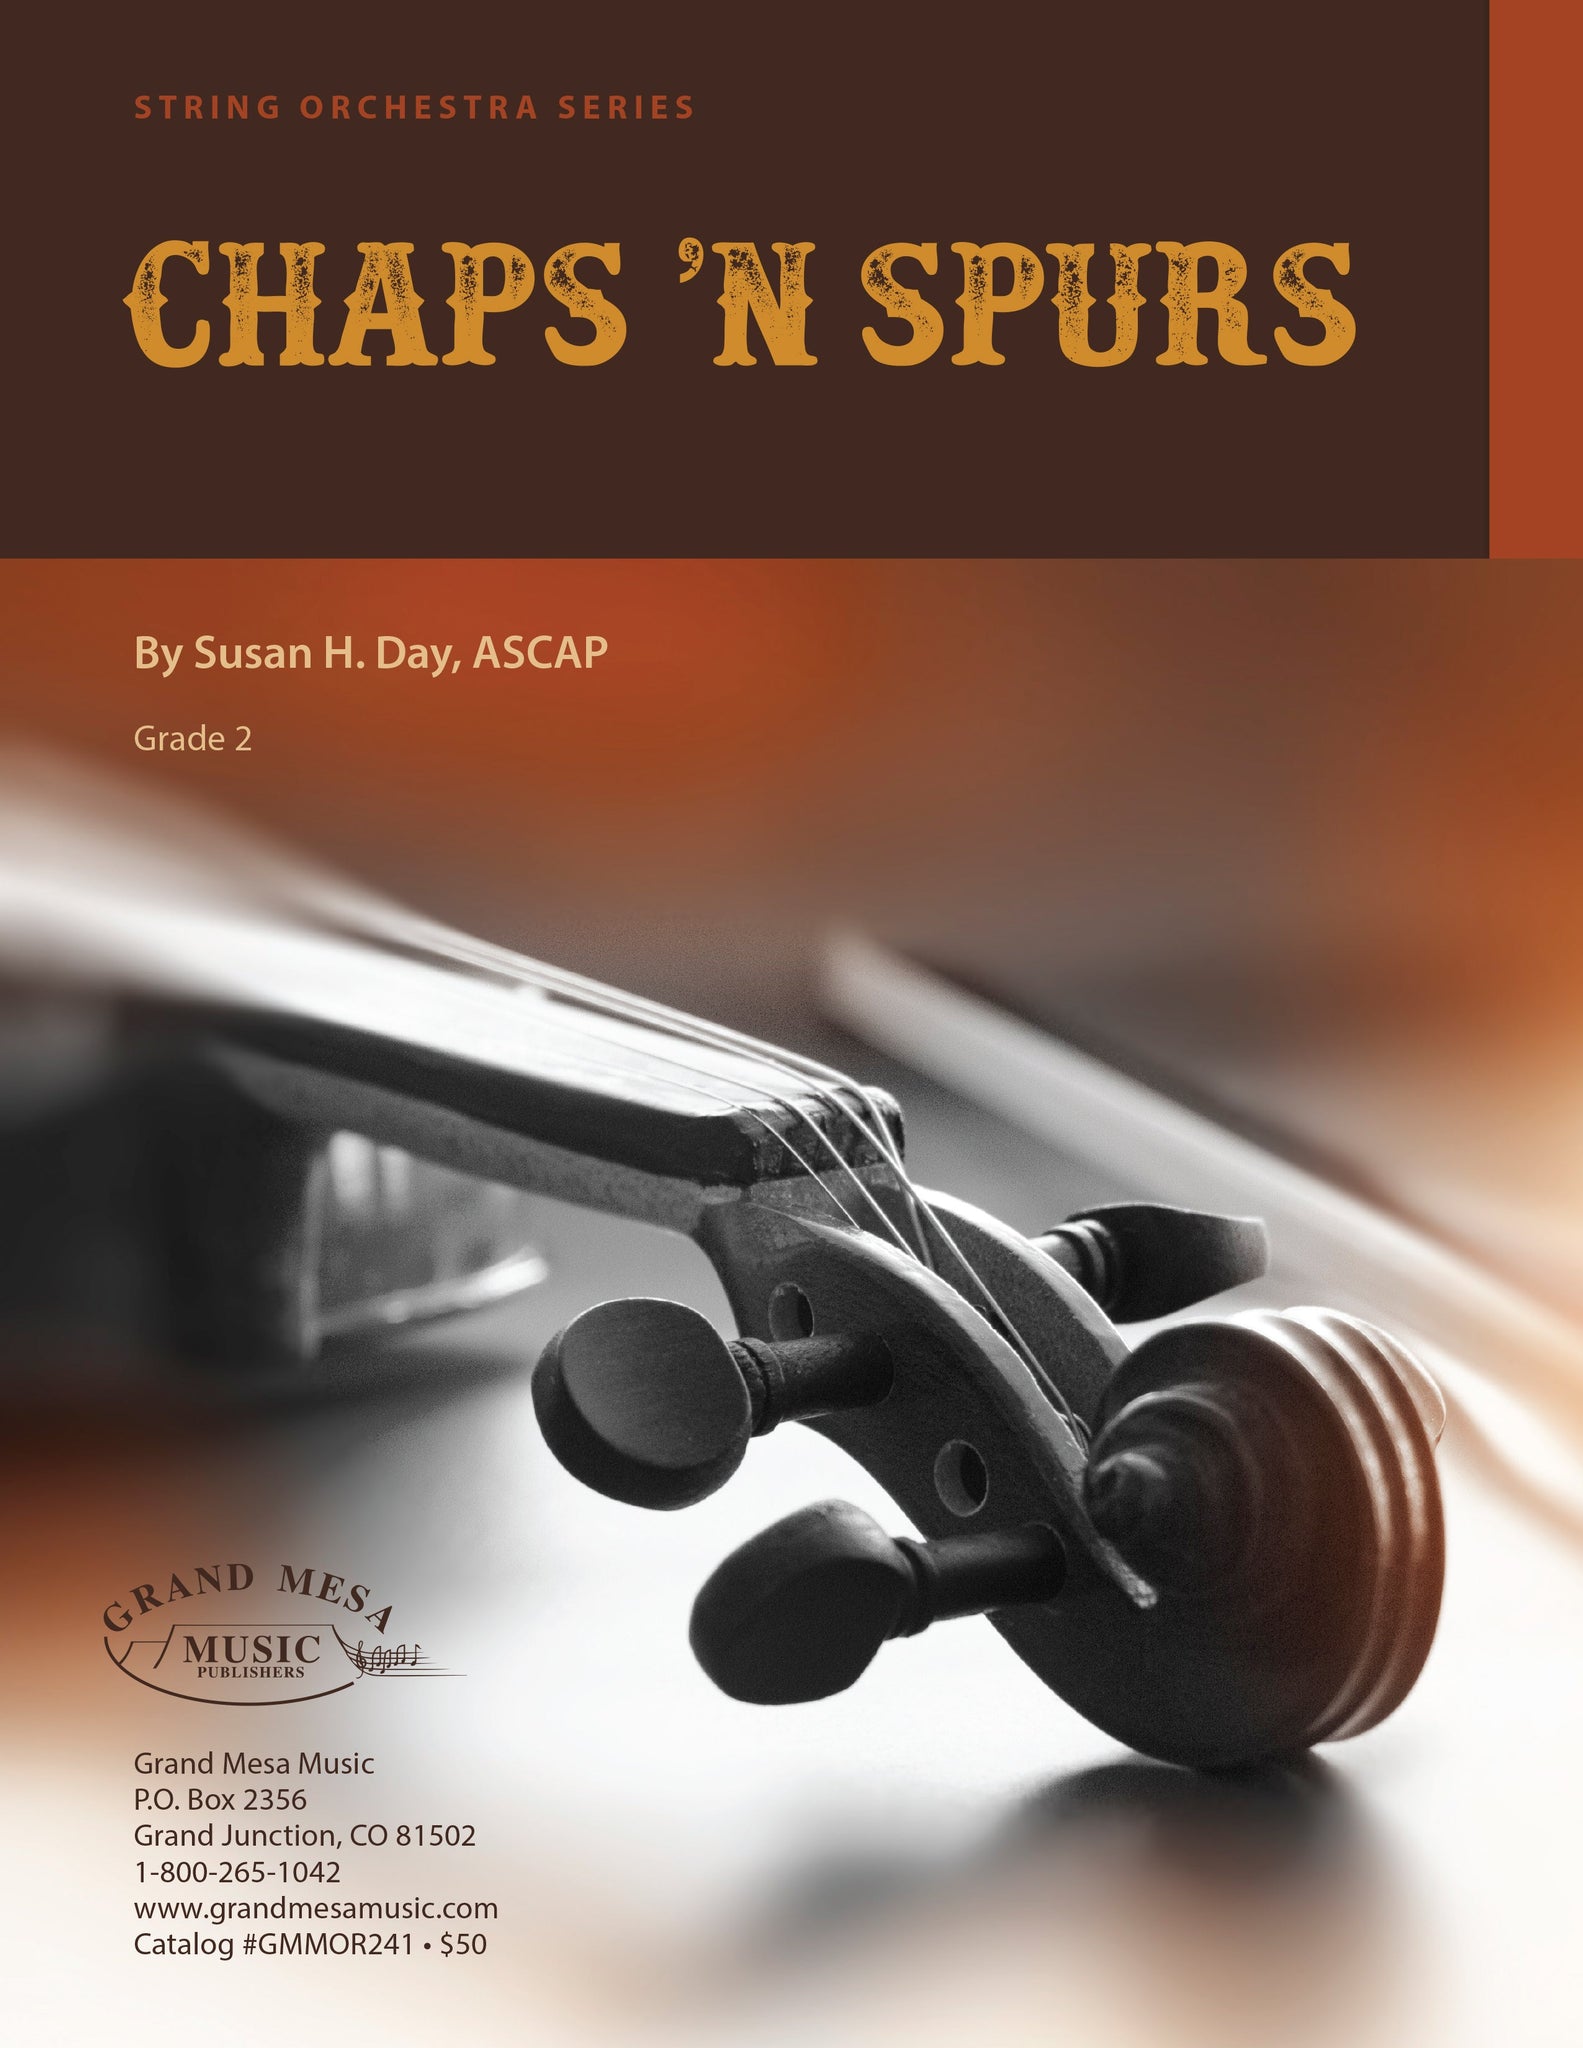 Strings sheet music cover of Chaps 'n Spurs, composed by Susan Day.